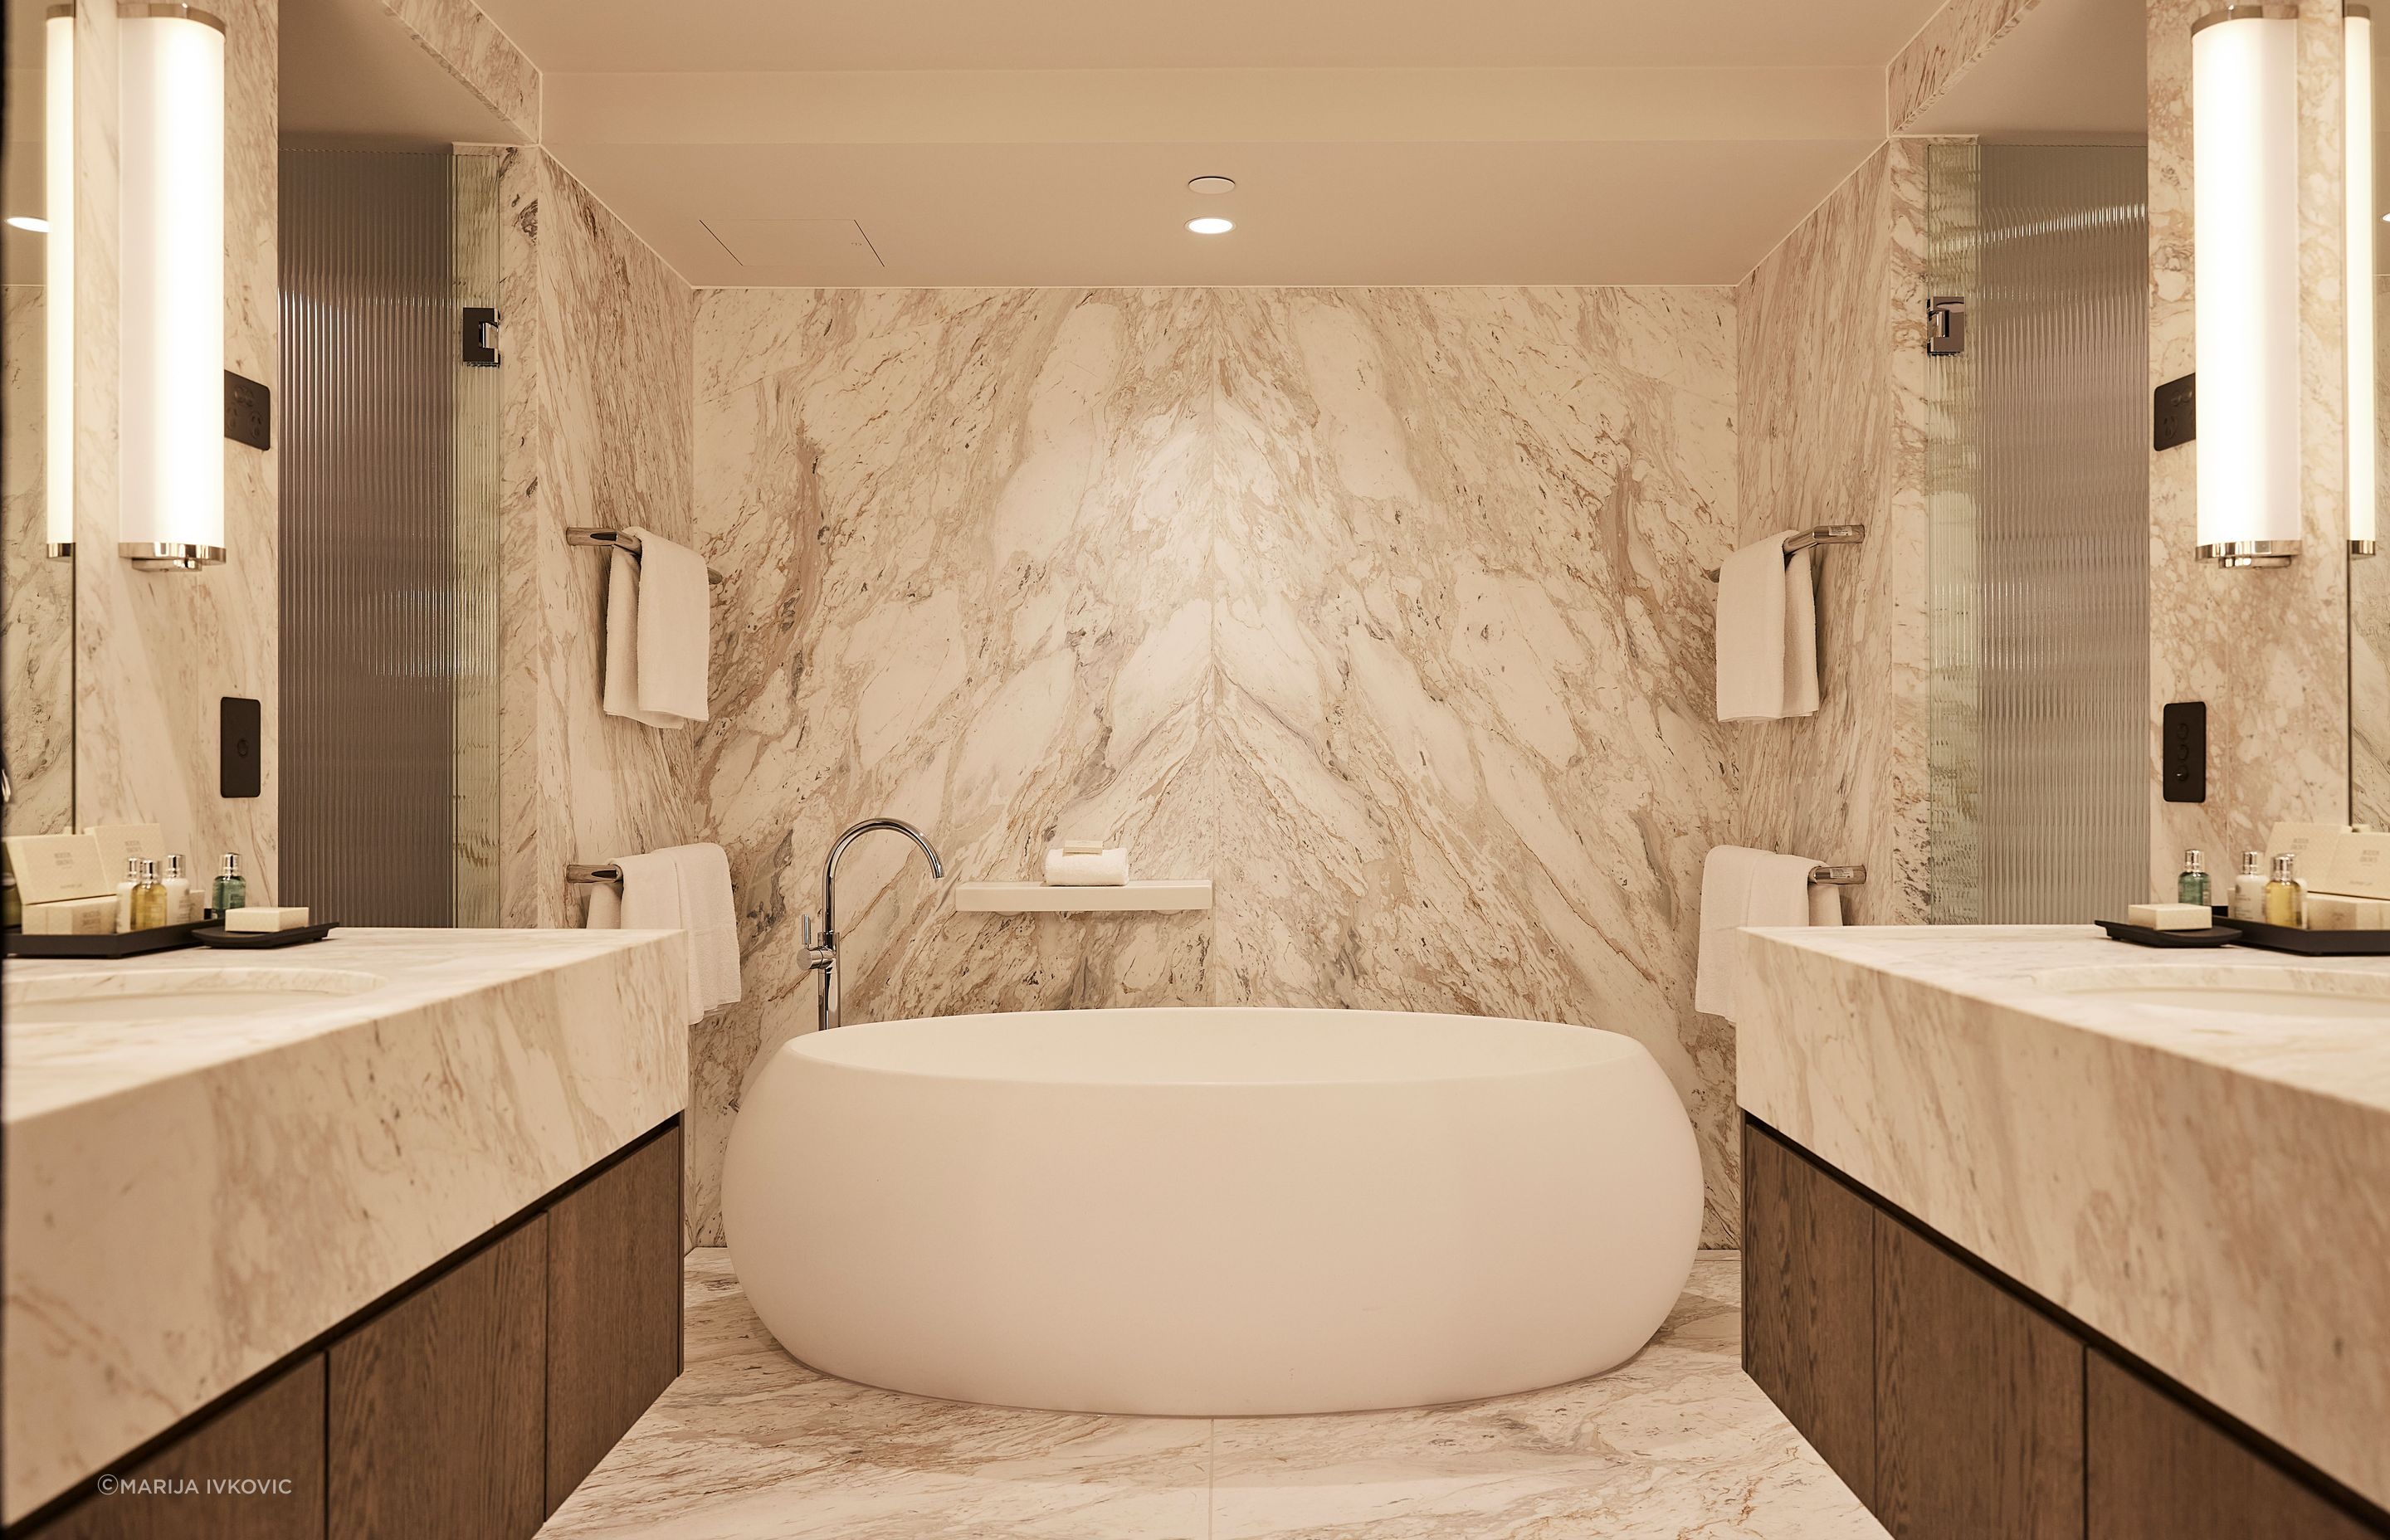 The bathing experience at The Lyall is opulent, with some suites featuring a freestanding bath that is fit for a queen.